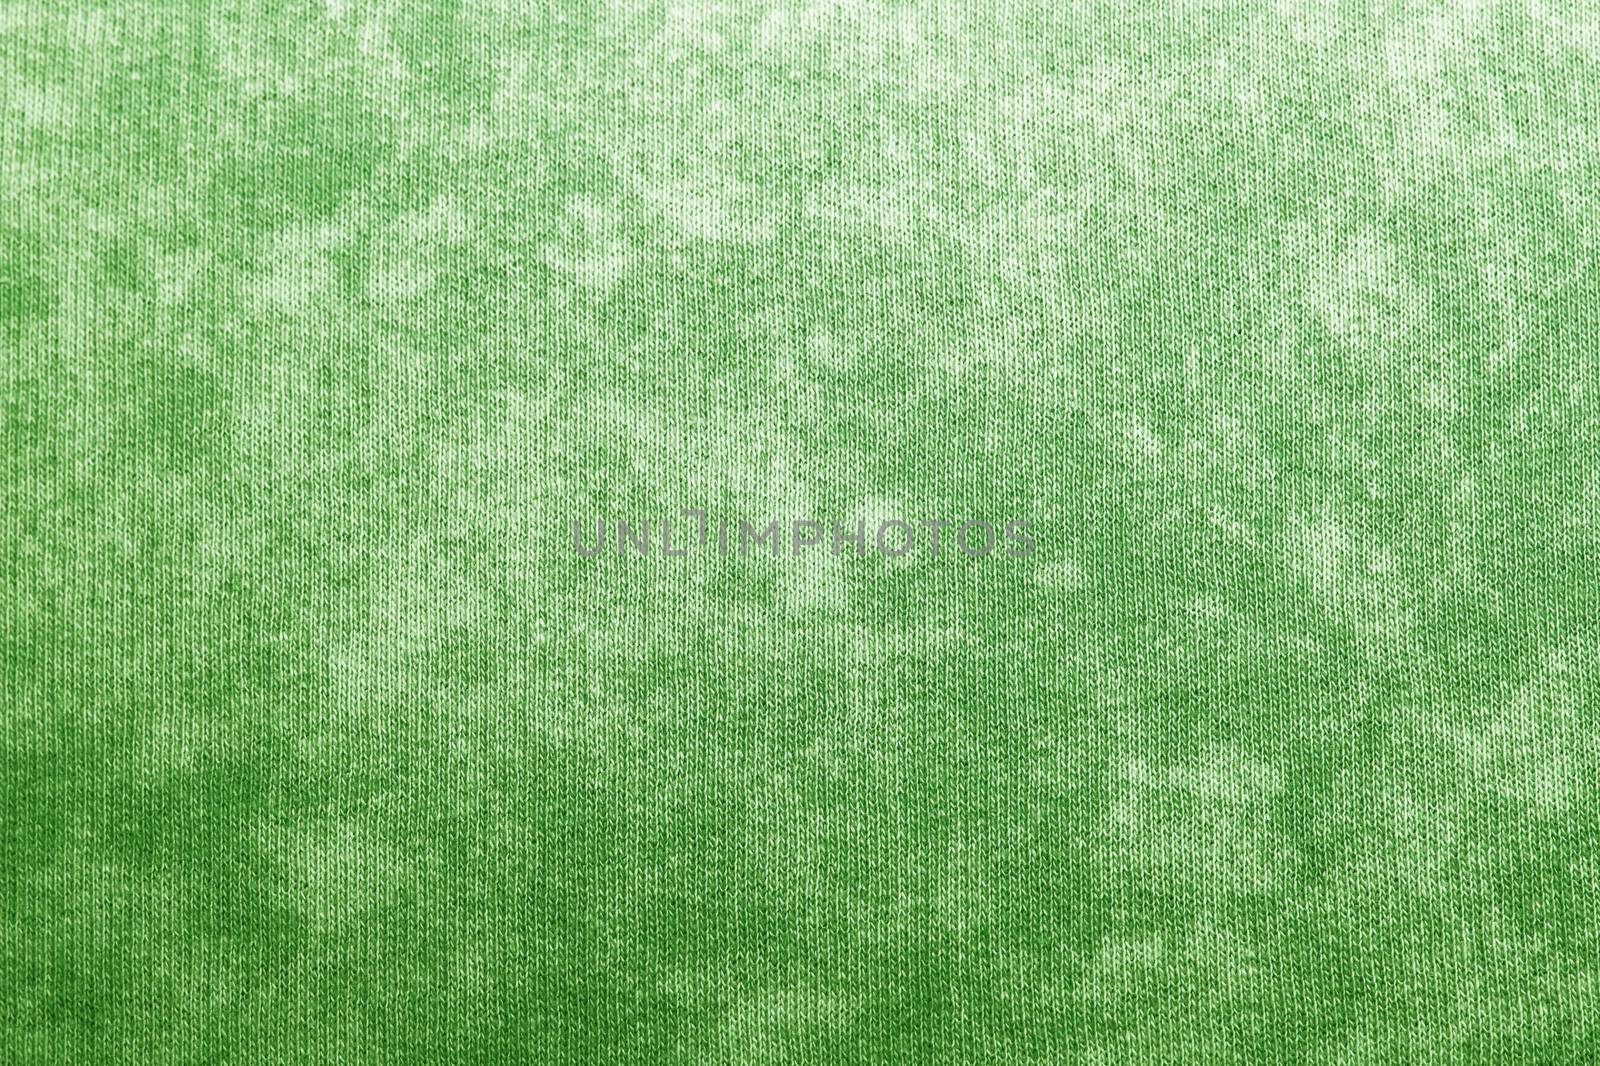 texture of knitted fabric, for backgrounds and textures by KoliadzynskaIryna